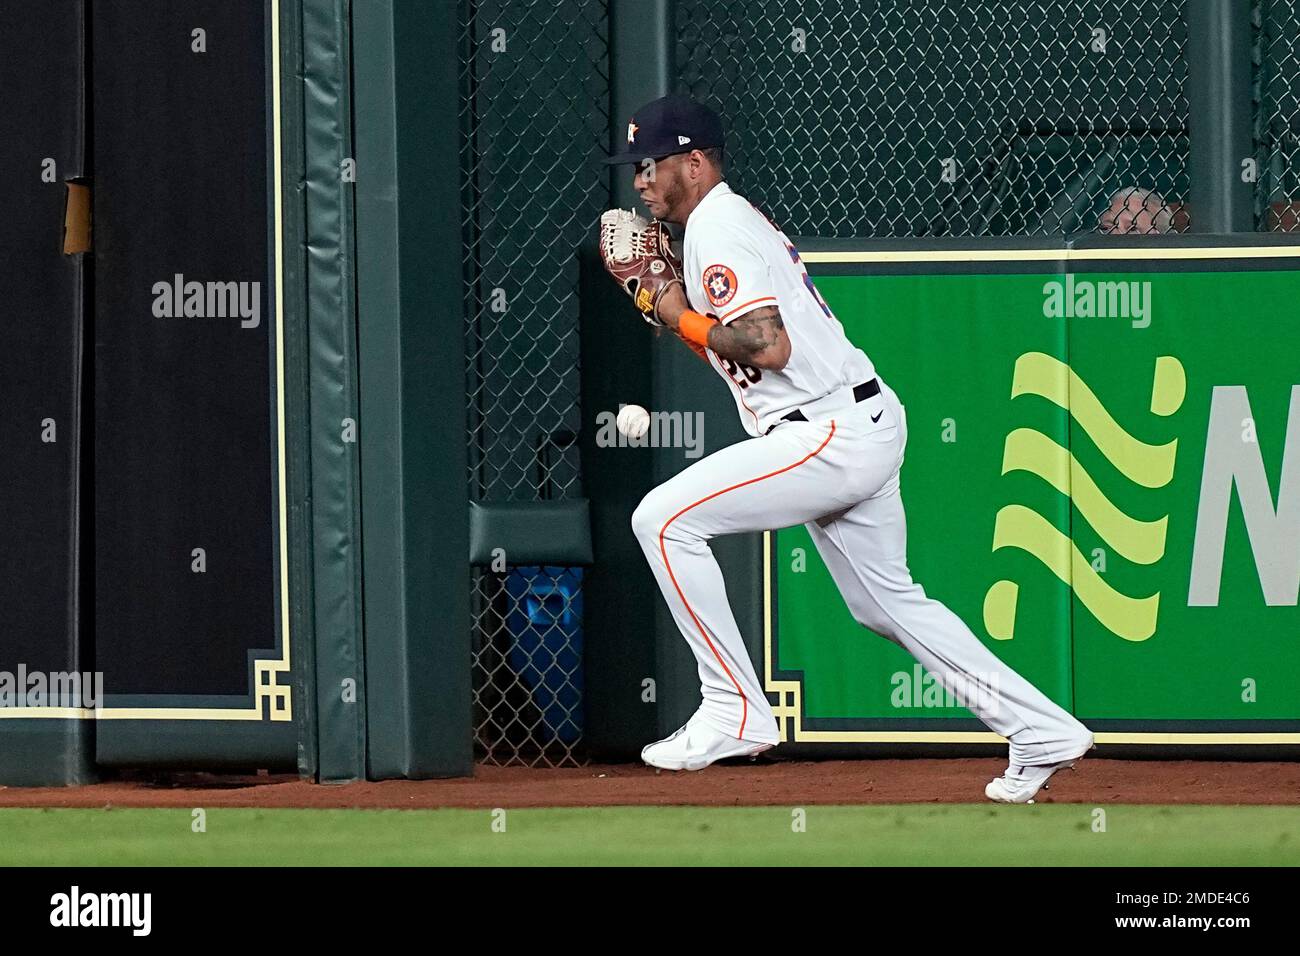 Houston Astros center fielder Jose Siri attempts to catch a fly ball by  Tampa Bay Rays' Brett Phillips during the second inning of a baseball game  Wednesday, Sept. 29, 2021, in Houston.